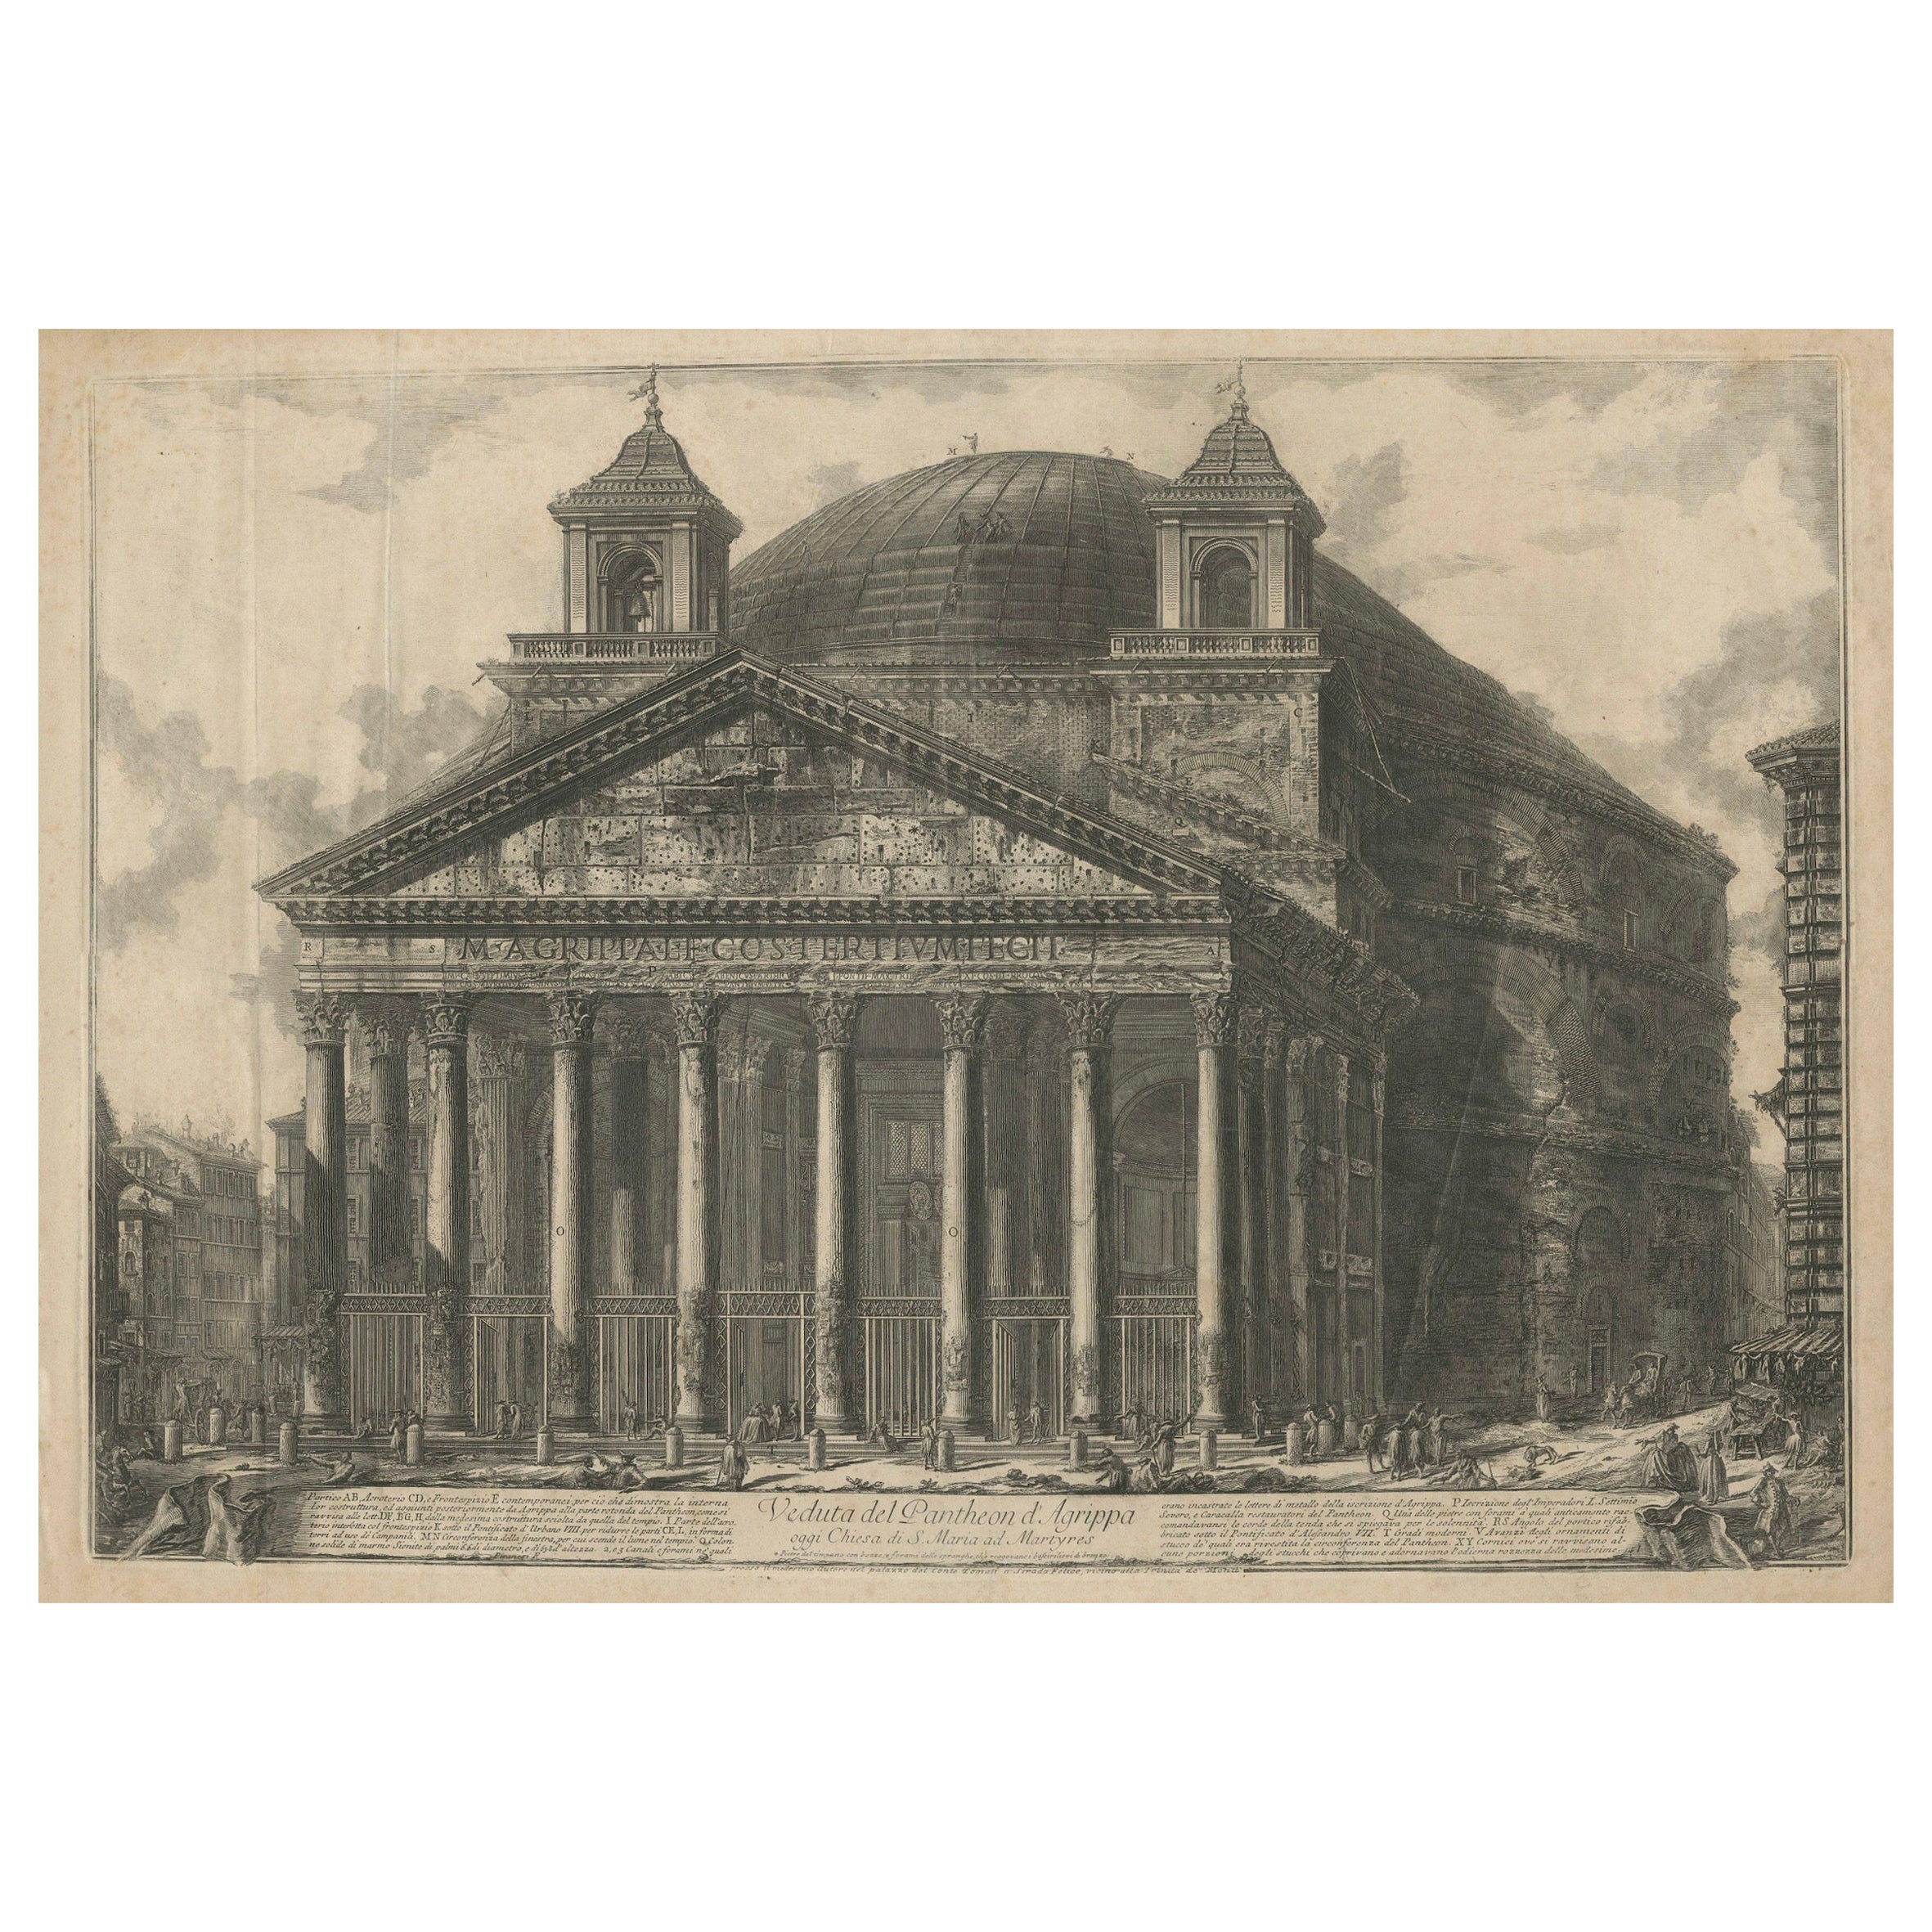 Agrippa's Legacy: The Pantheon as St. Maria ad Martyres, 1761